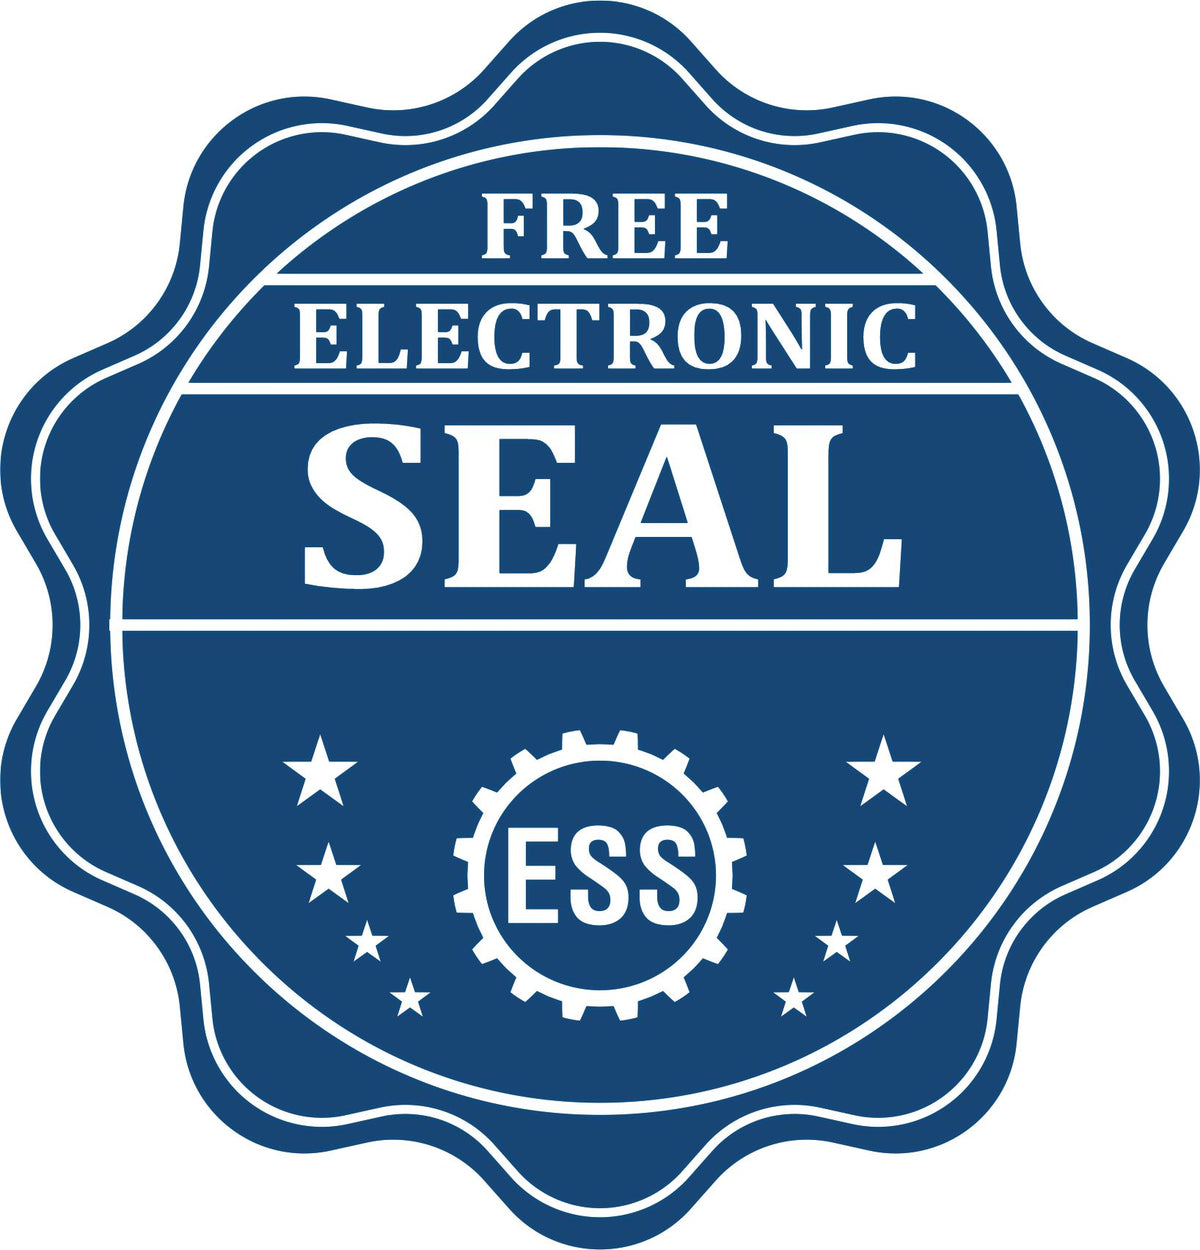 A badge showing a free electronic seal for the Premium MaxLight Pre-Inked Massachusetts Landscape Architectural Stamp with stars and the ESS gear on the emblem.